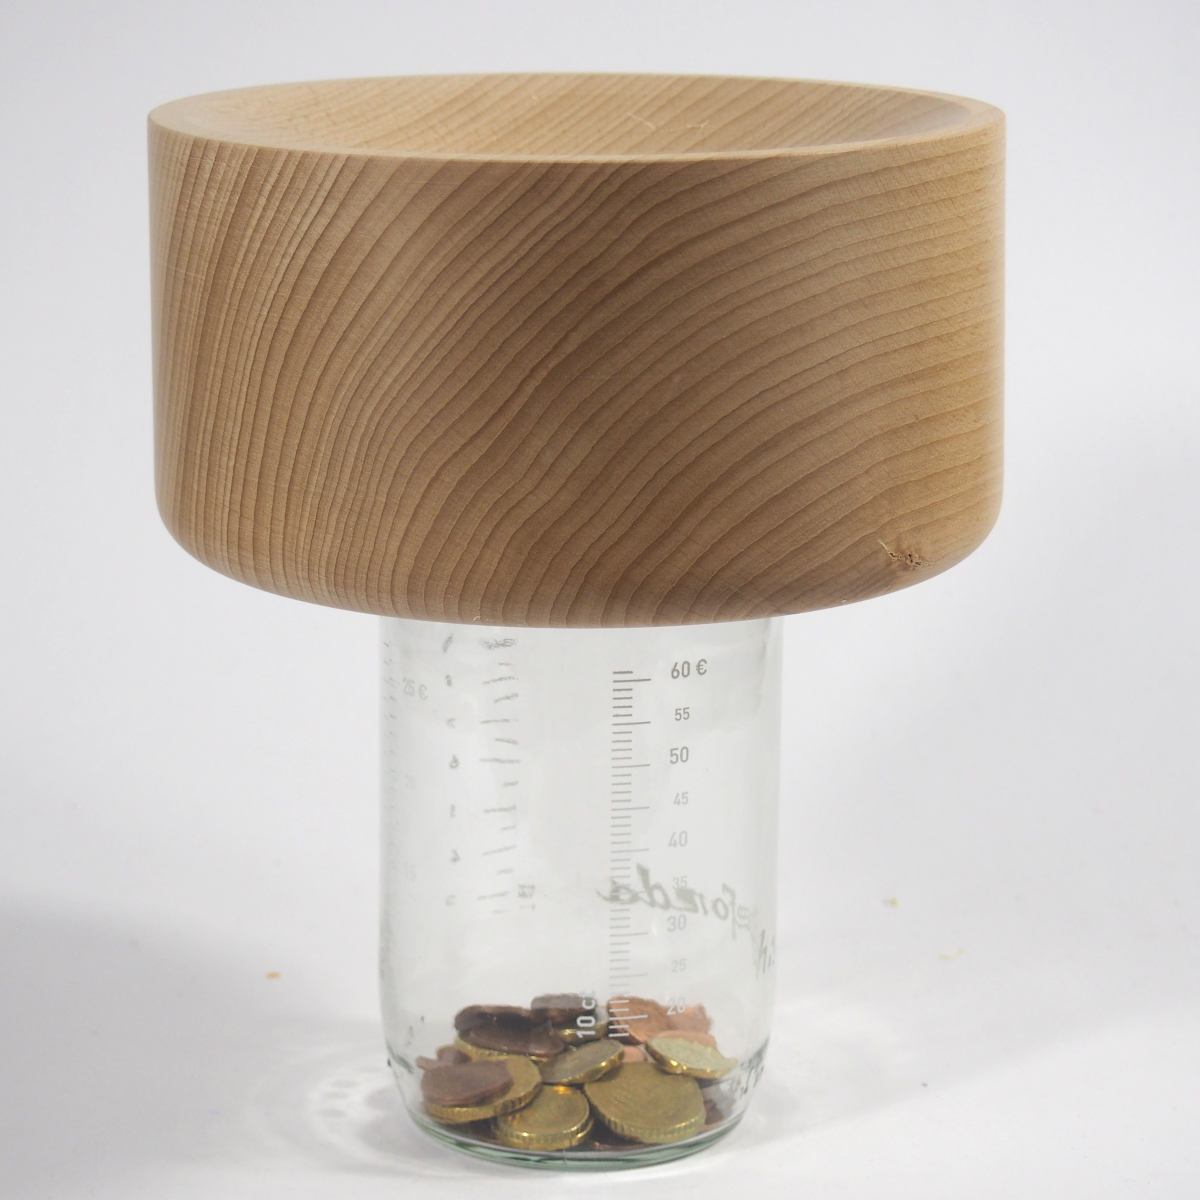 Money Box with Wooden Coin Funnel – Medium Version